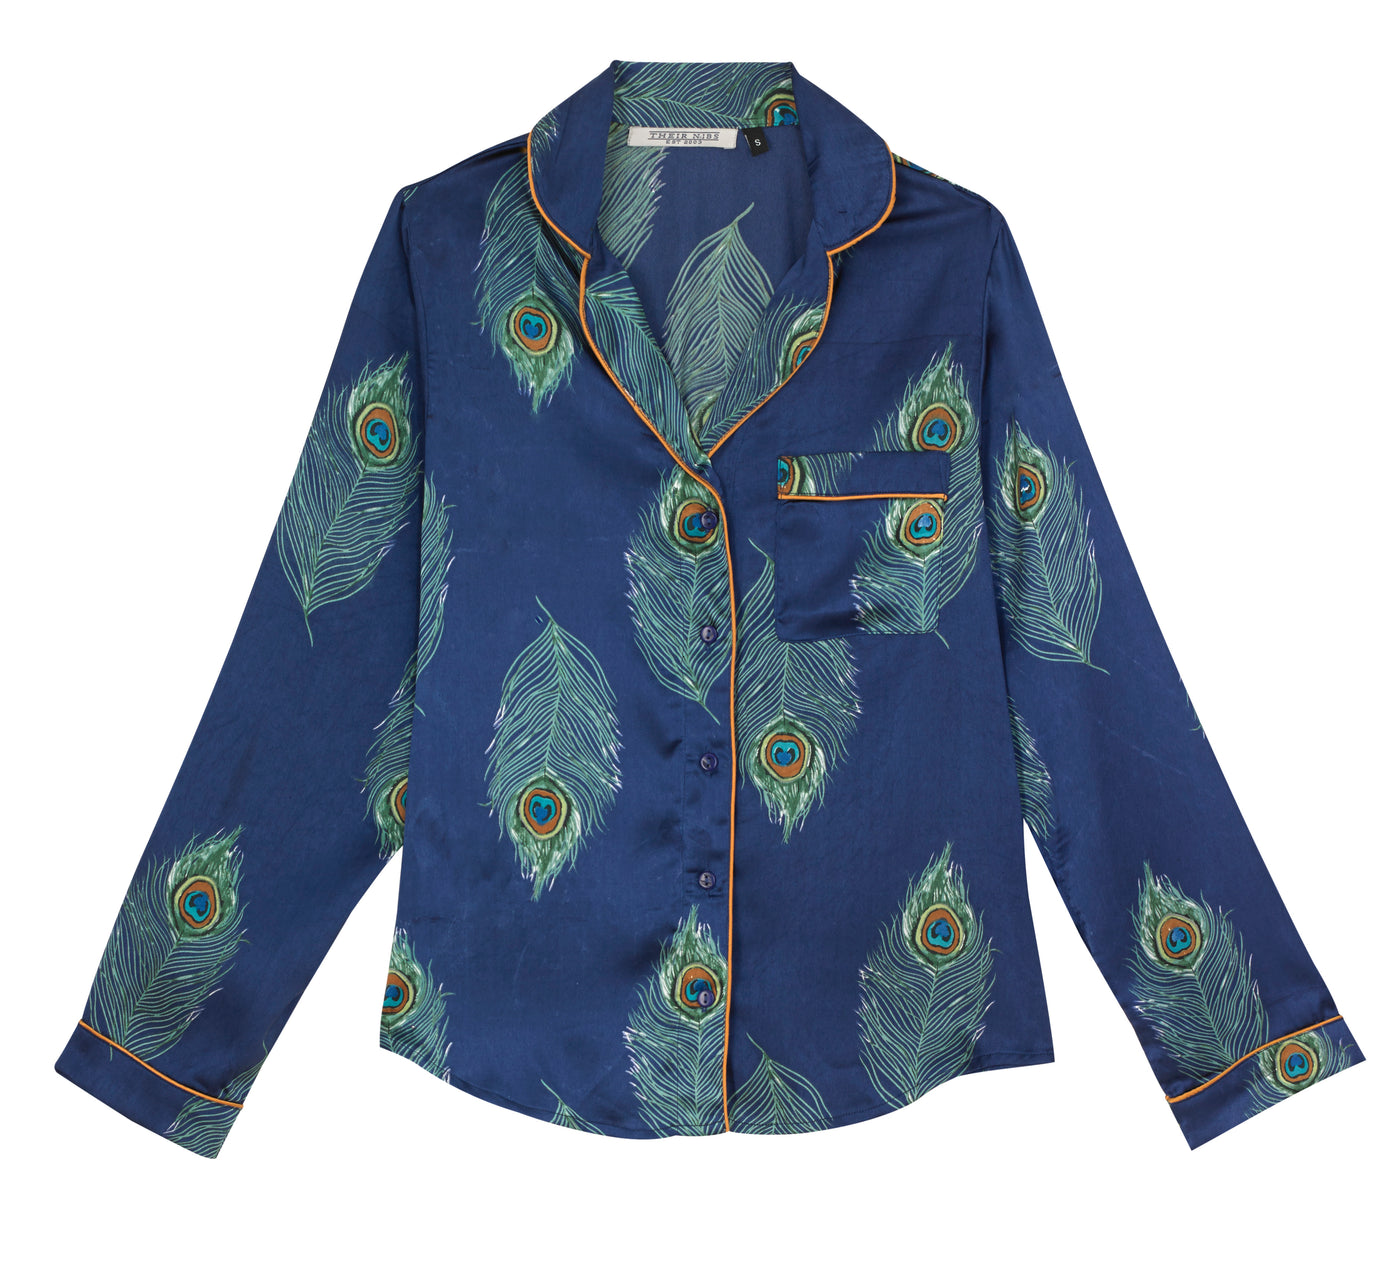 Womens Stand Alone Satin Traditional Pyjama Top, Navy Peacock Feather